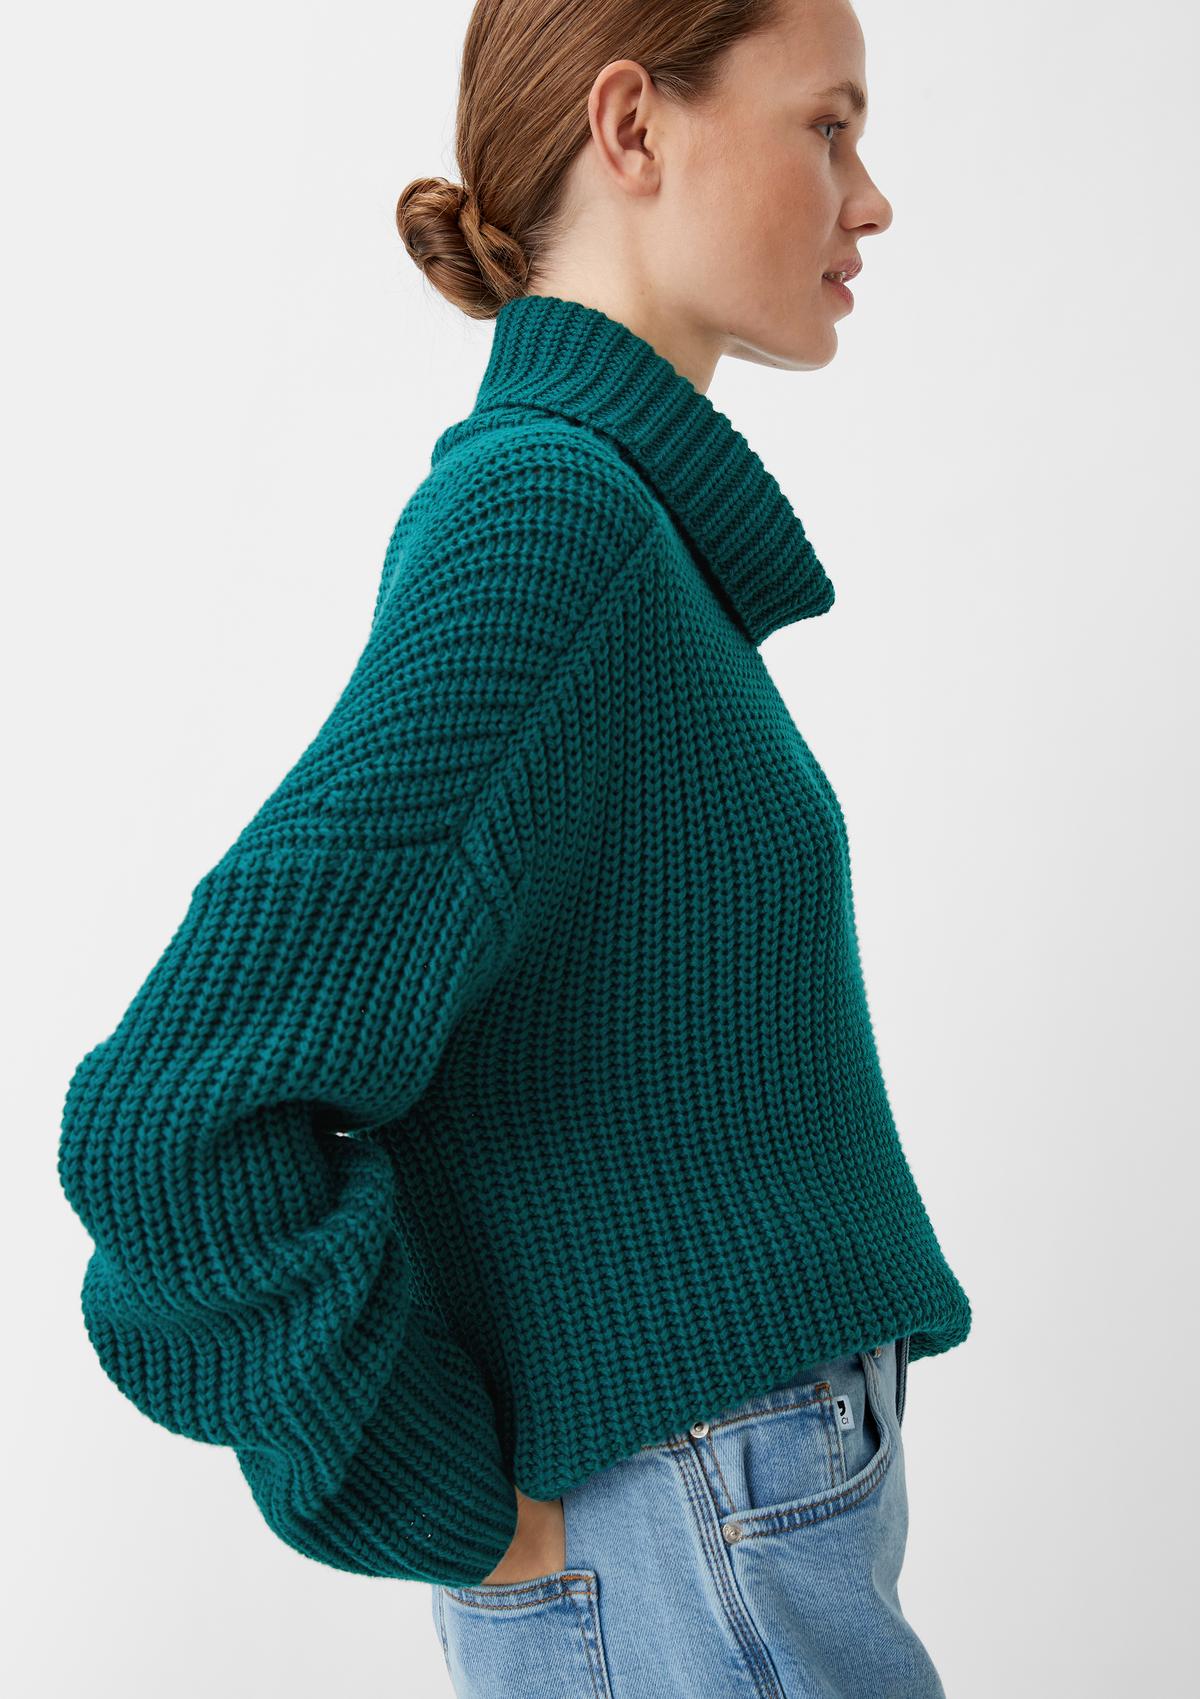 Loose-fitting knitted jumper with a polo neck